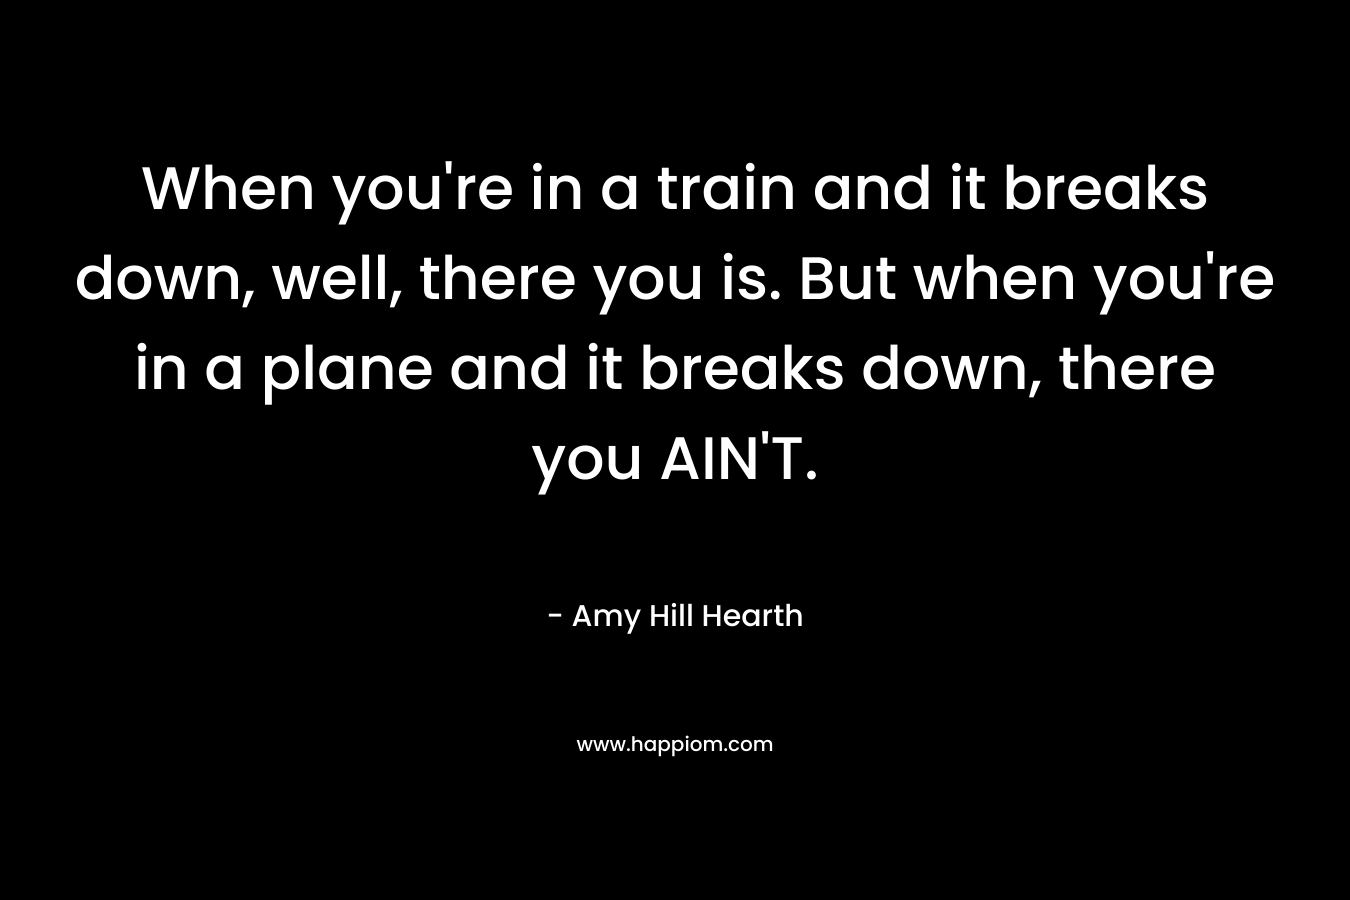 When you’re in a train and it breaks down, well, there you is. But when you’re in a plane and it breaks down, there you AIN’T. – Amy Hill Hearth